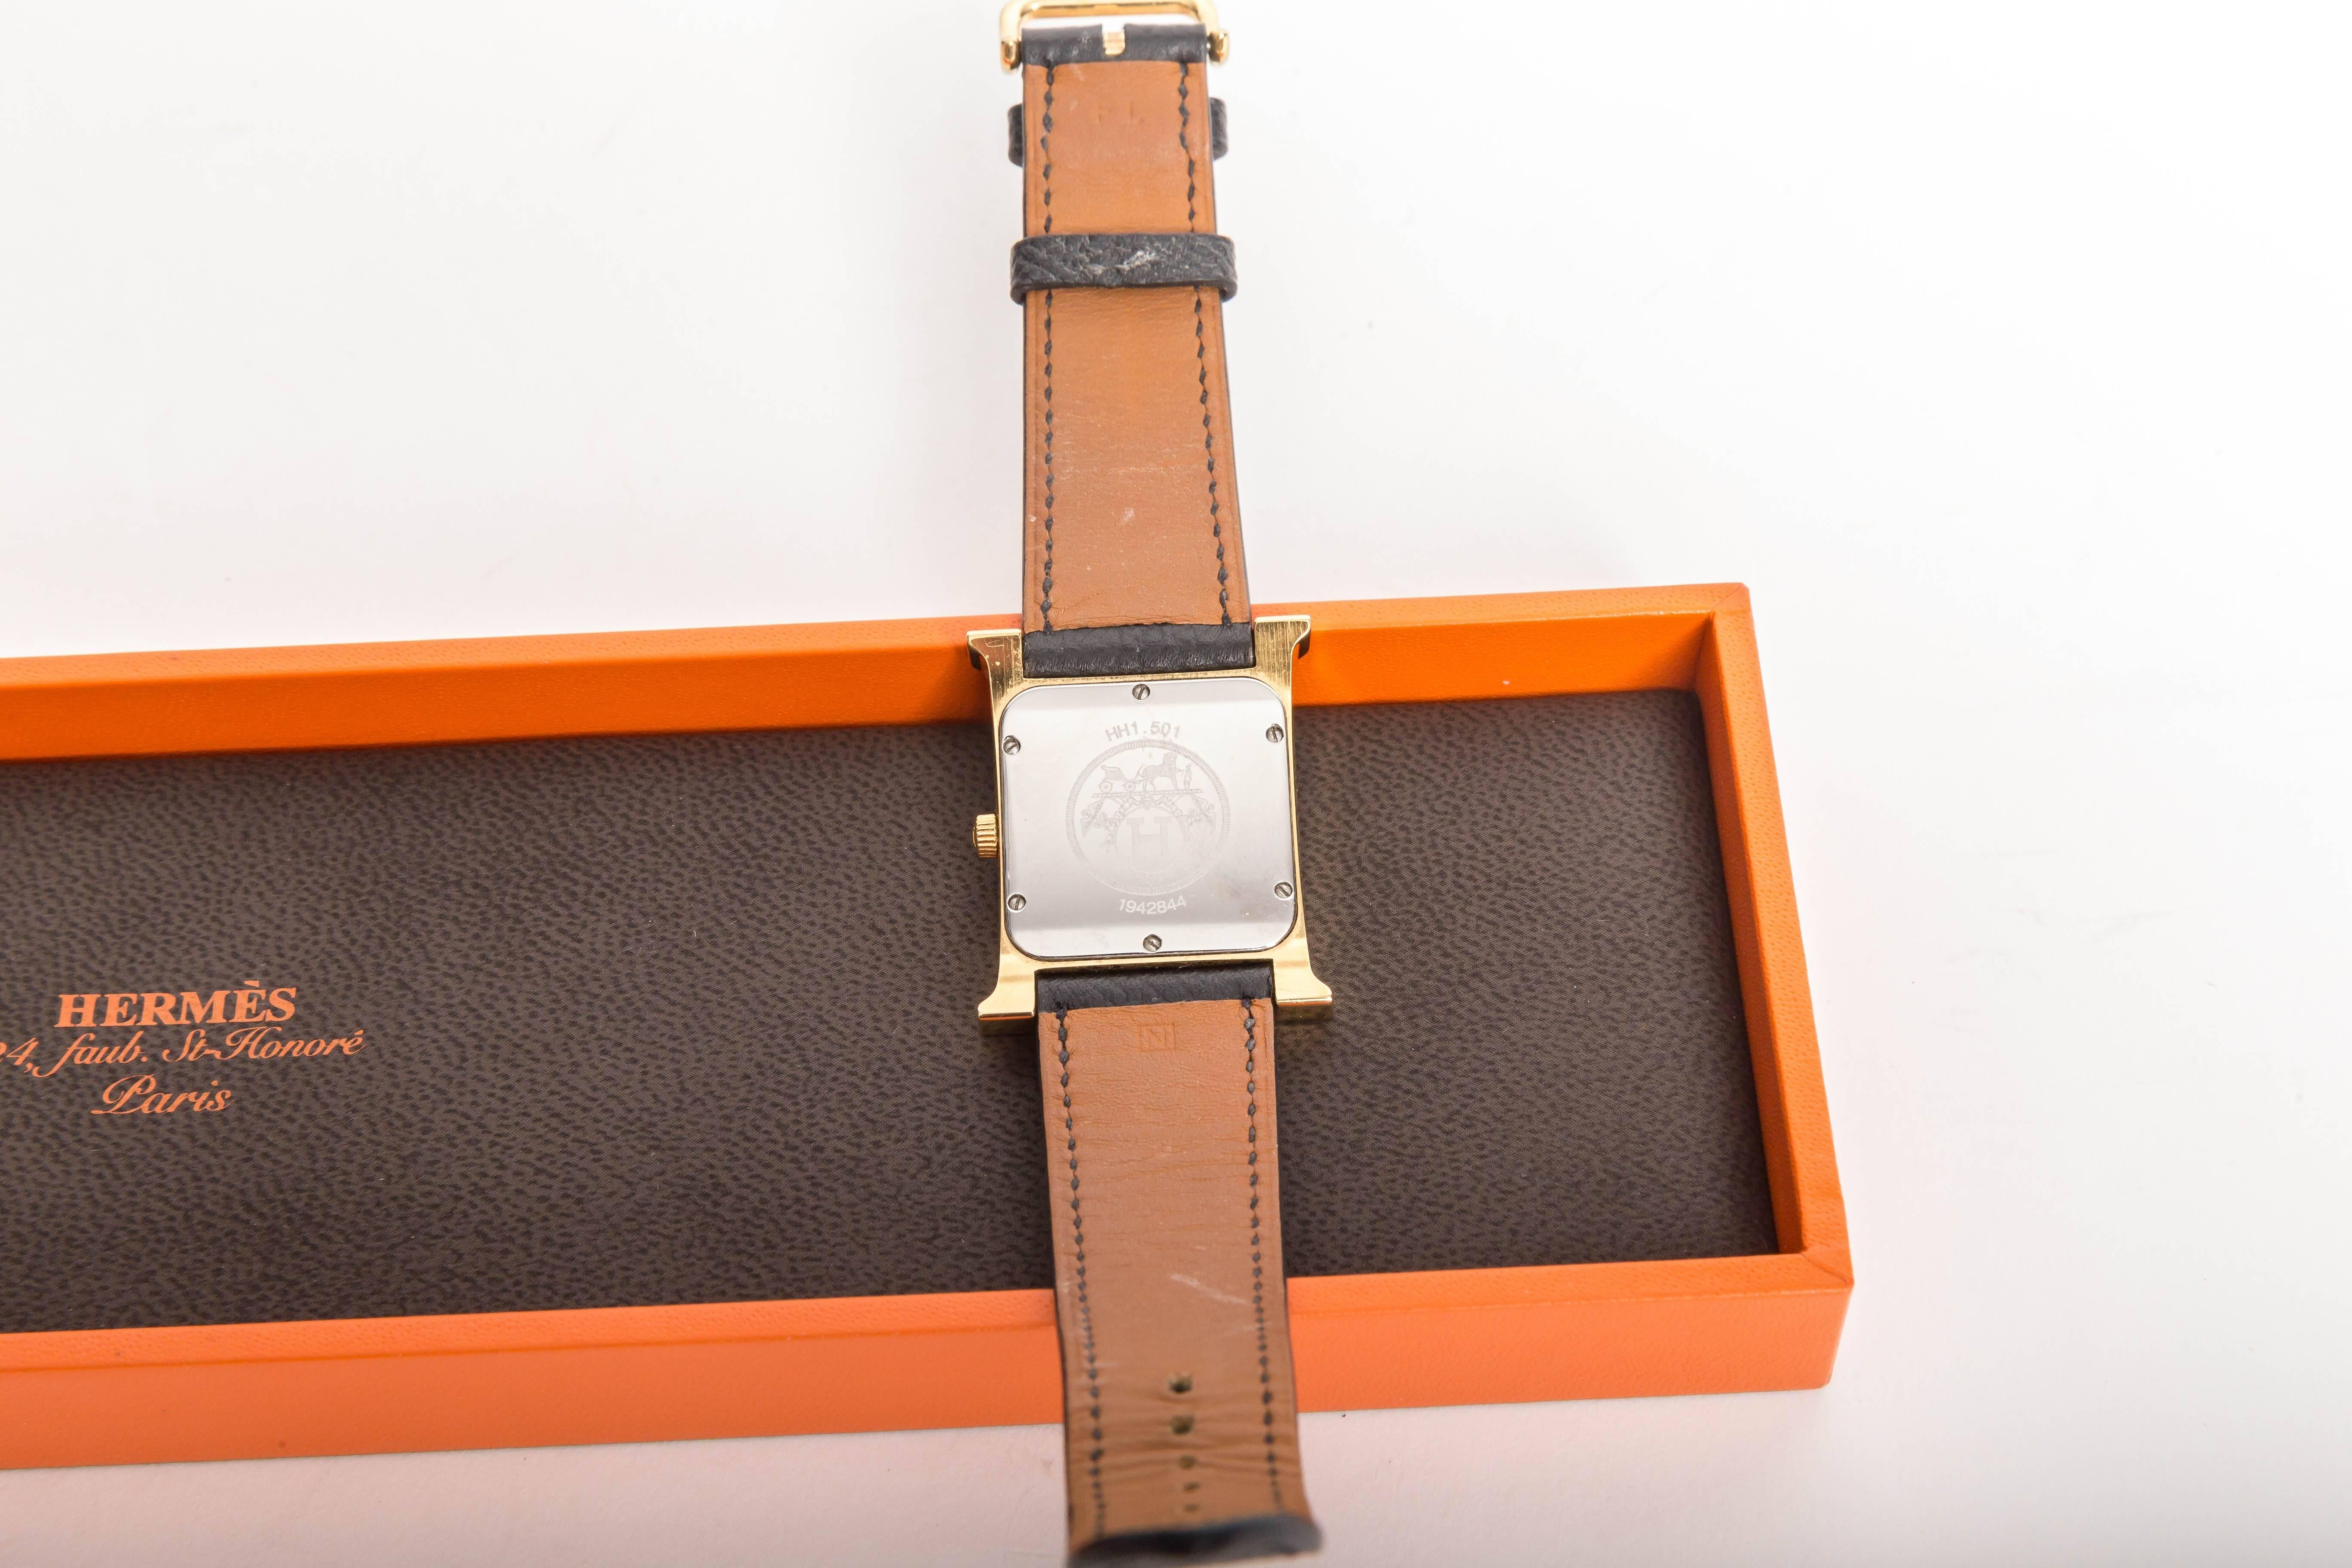 Hermes Heure H Watch in Goldtone Stainless Steel on a Grained Leather Strap 3